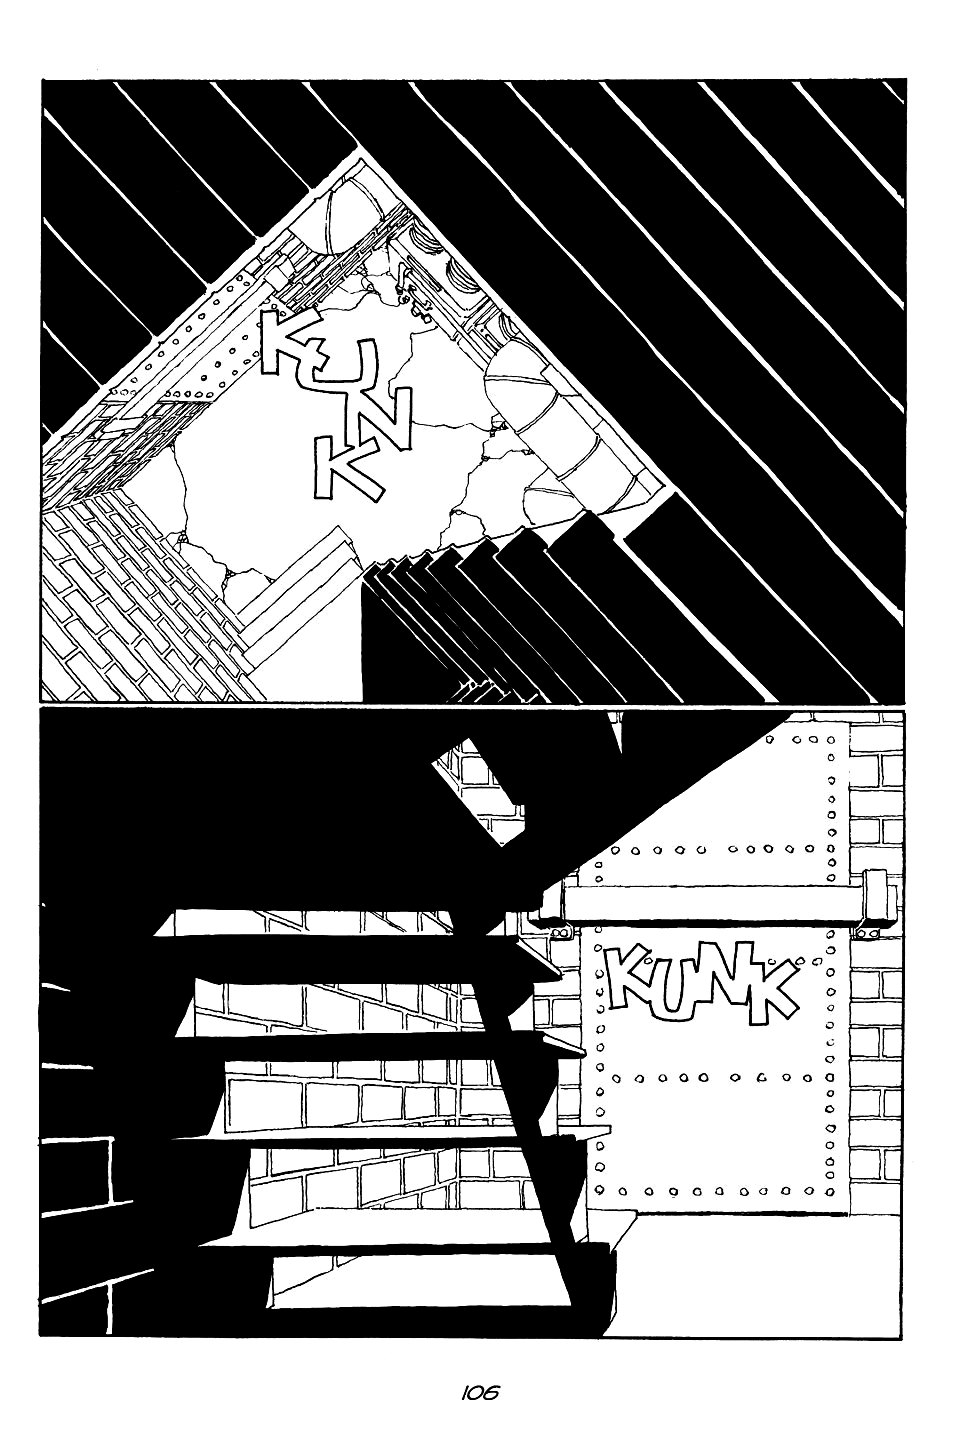 page 106 of sin city 1 the hard goodbye